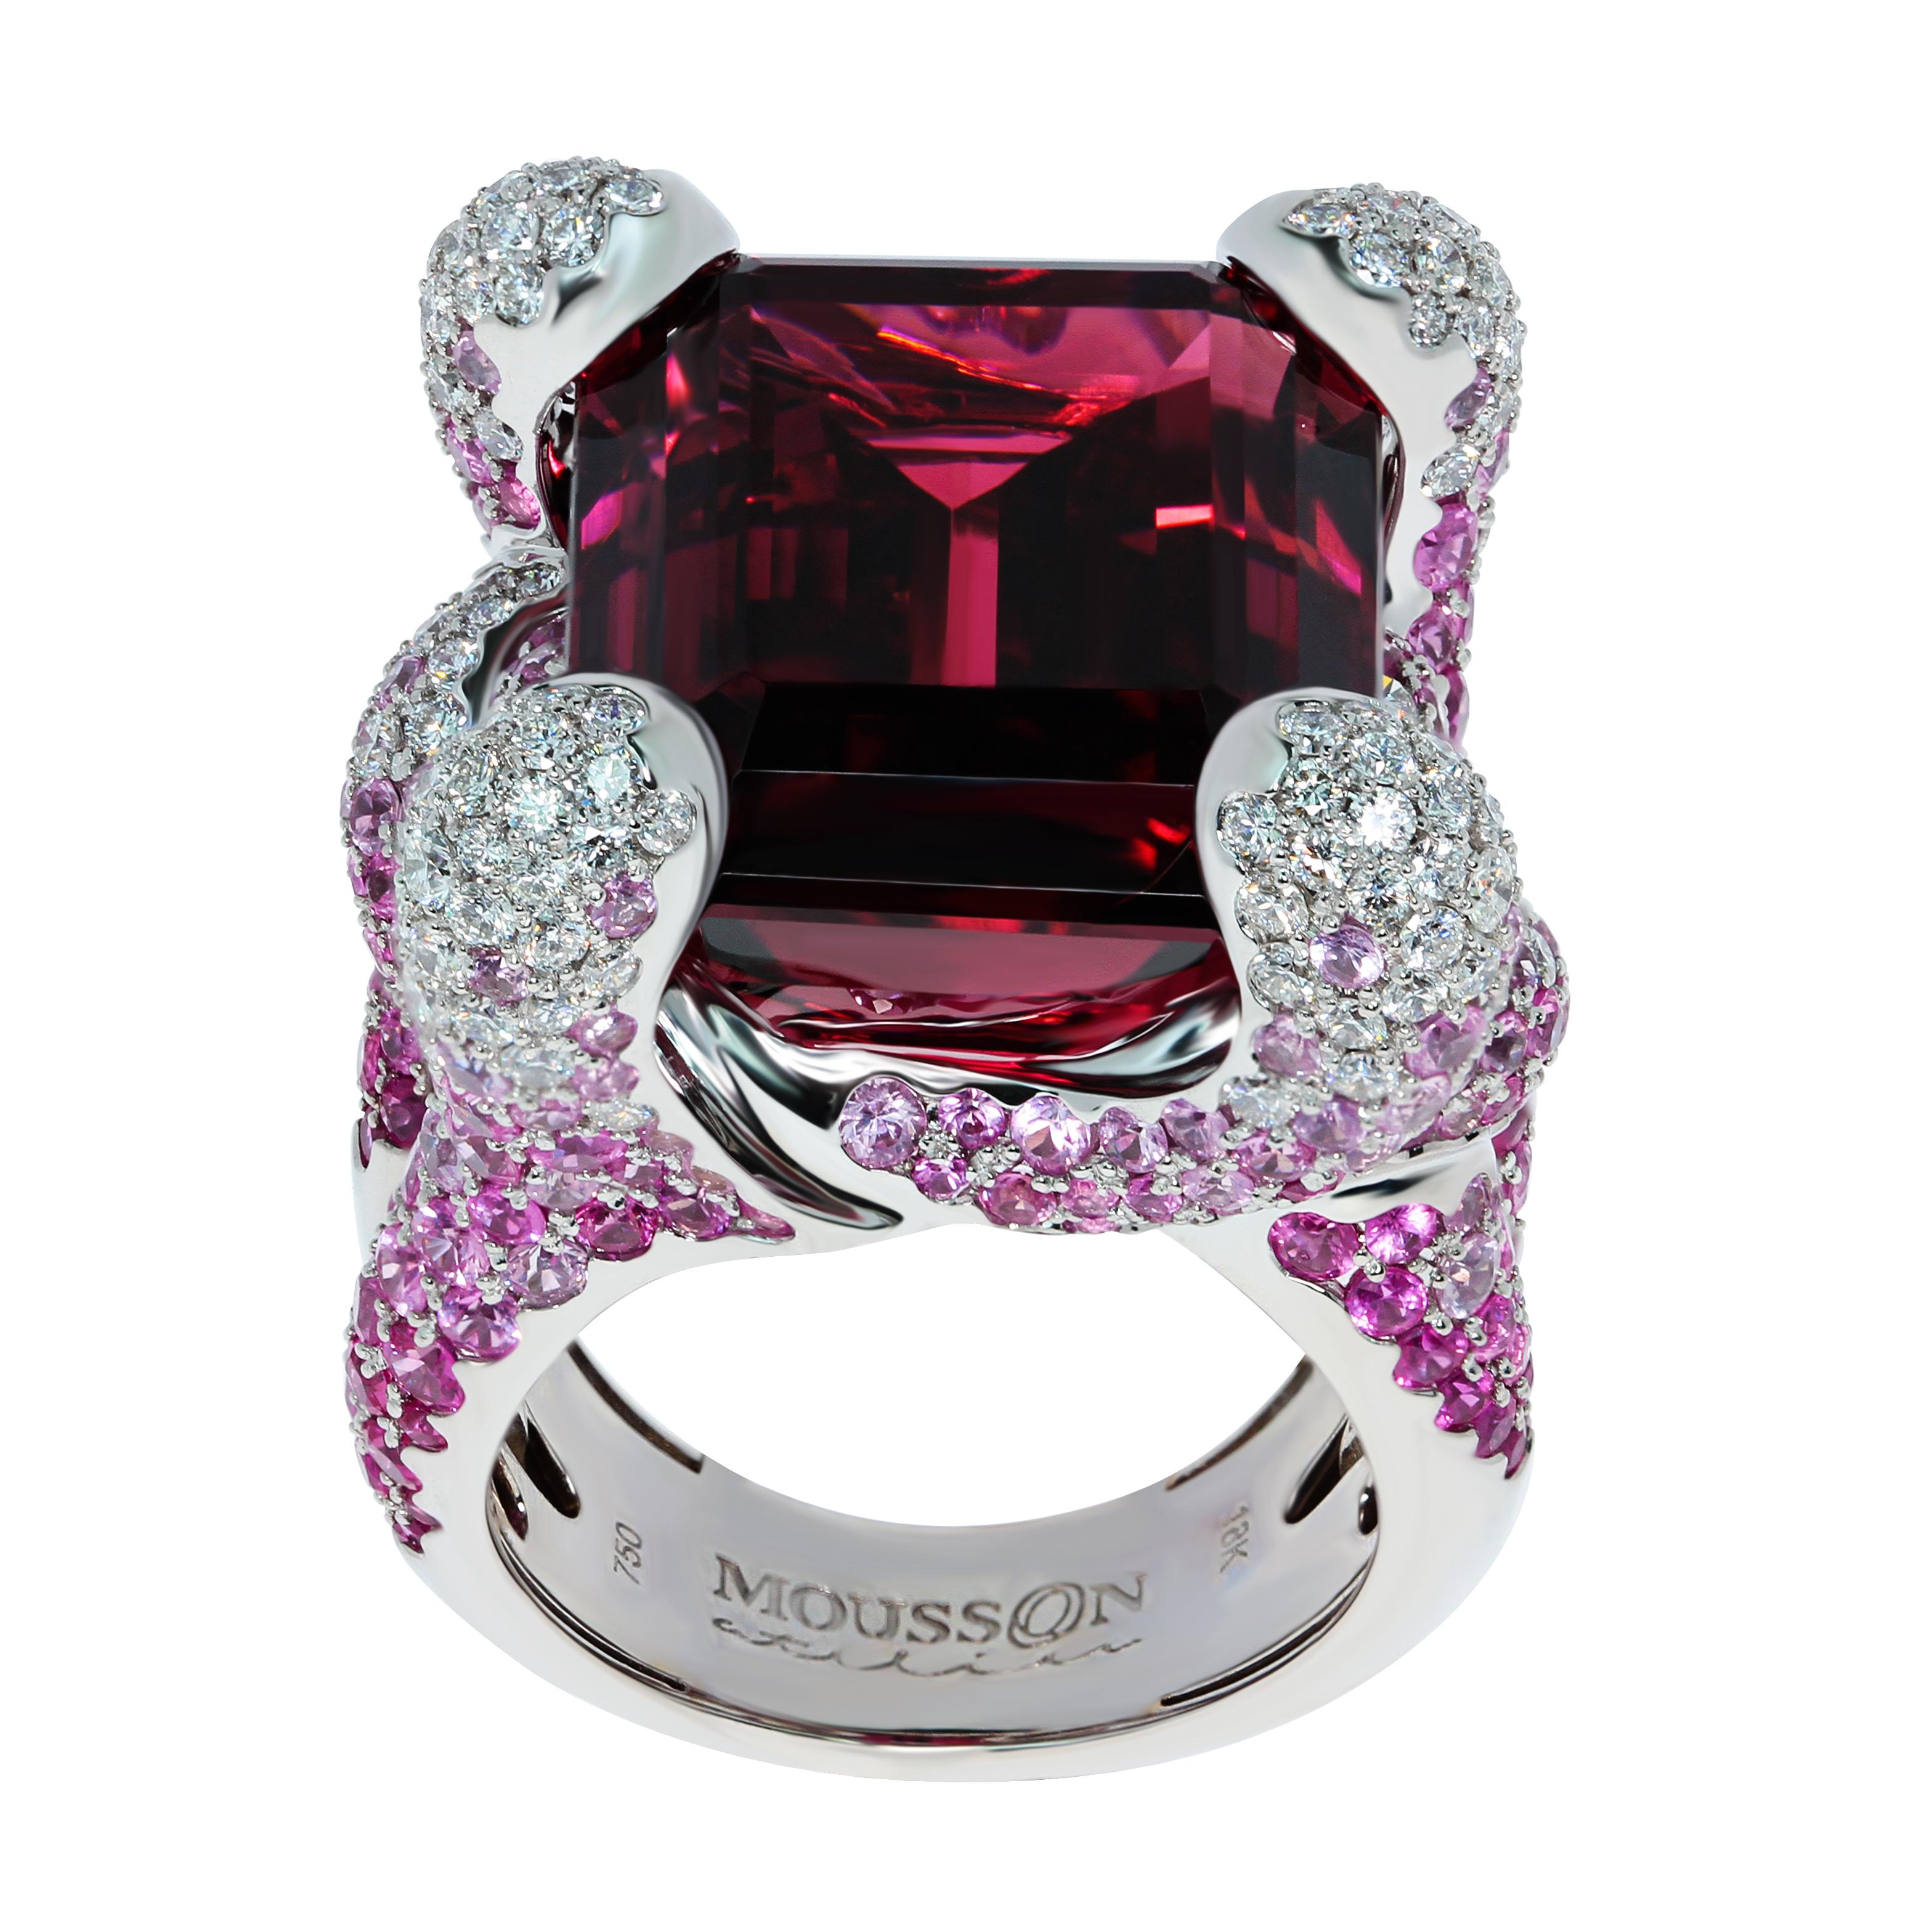 Rubellite 28.70 Carat Pink Sapphires Diamonds 18 Karat White Gold New Age Ring
Look at this spectacular Top Quality 28.70 Ct Rubellite, hand-picked 296 Pink Sapphires weighing 5.71 Carat and 132 Diamonds weighing 1.46 Carat combination. This